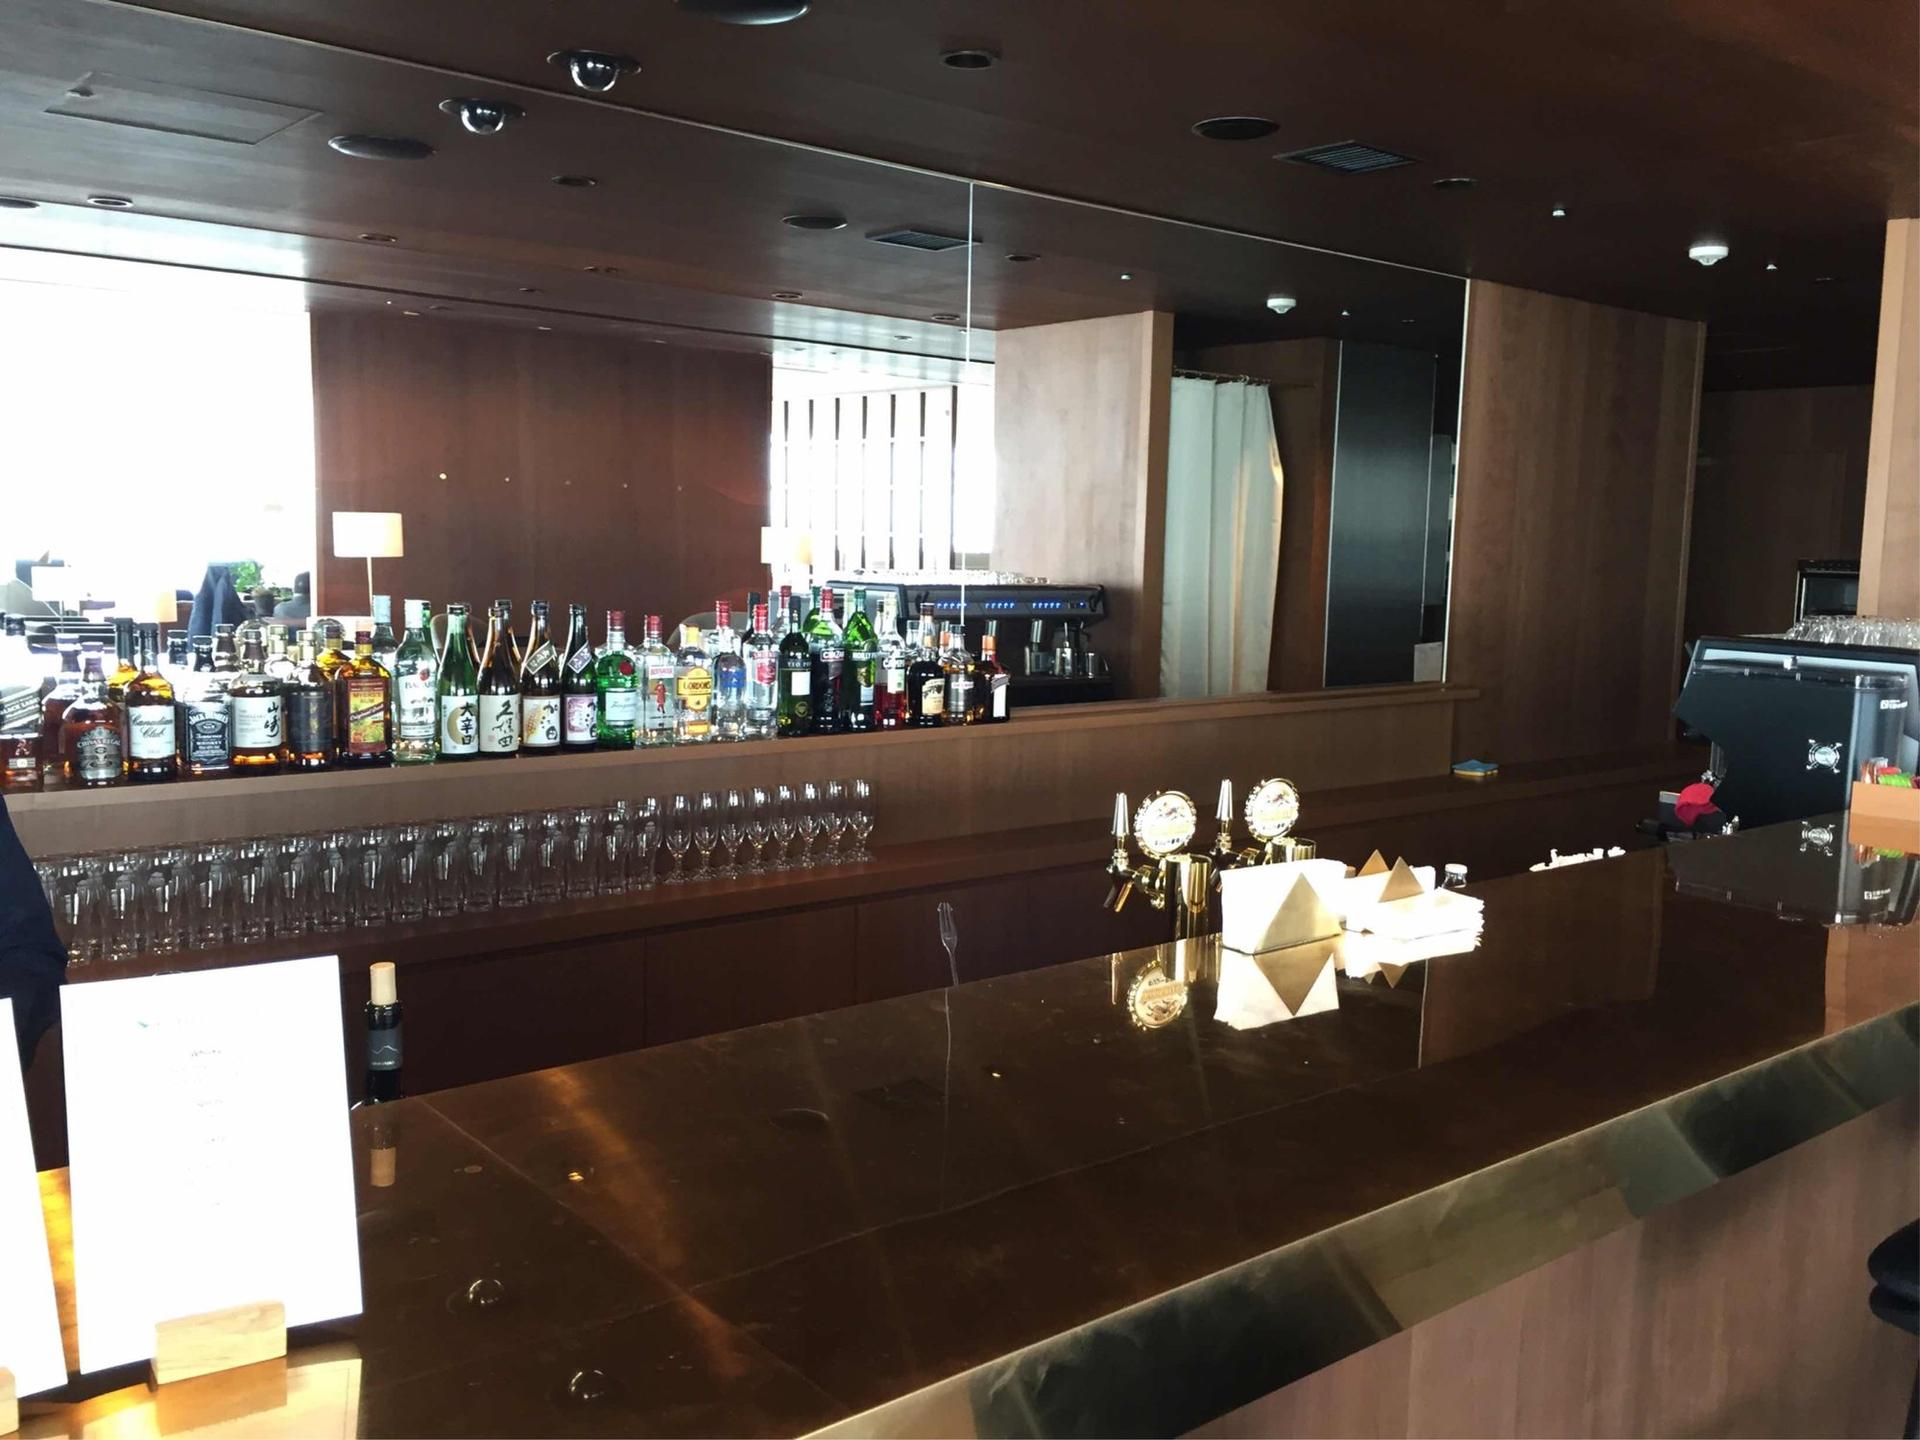 Cathay Pacific Lounge image 9 of 49